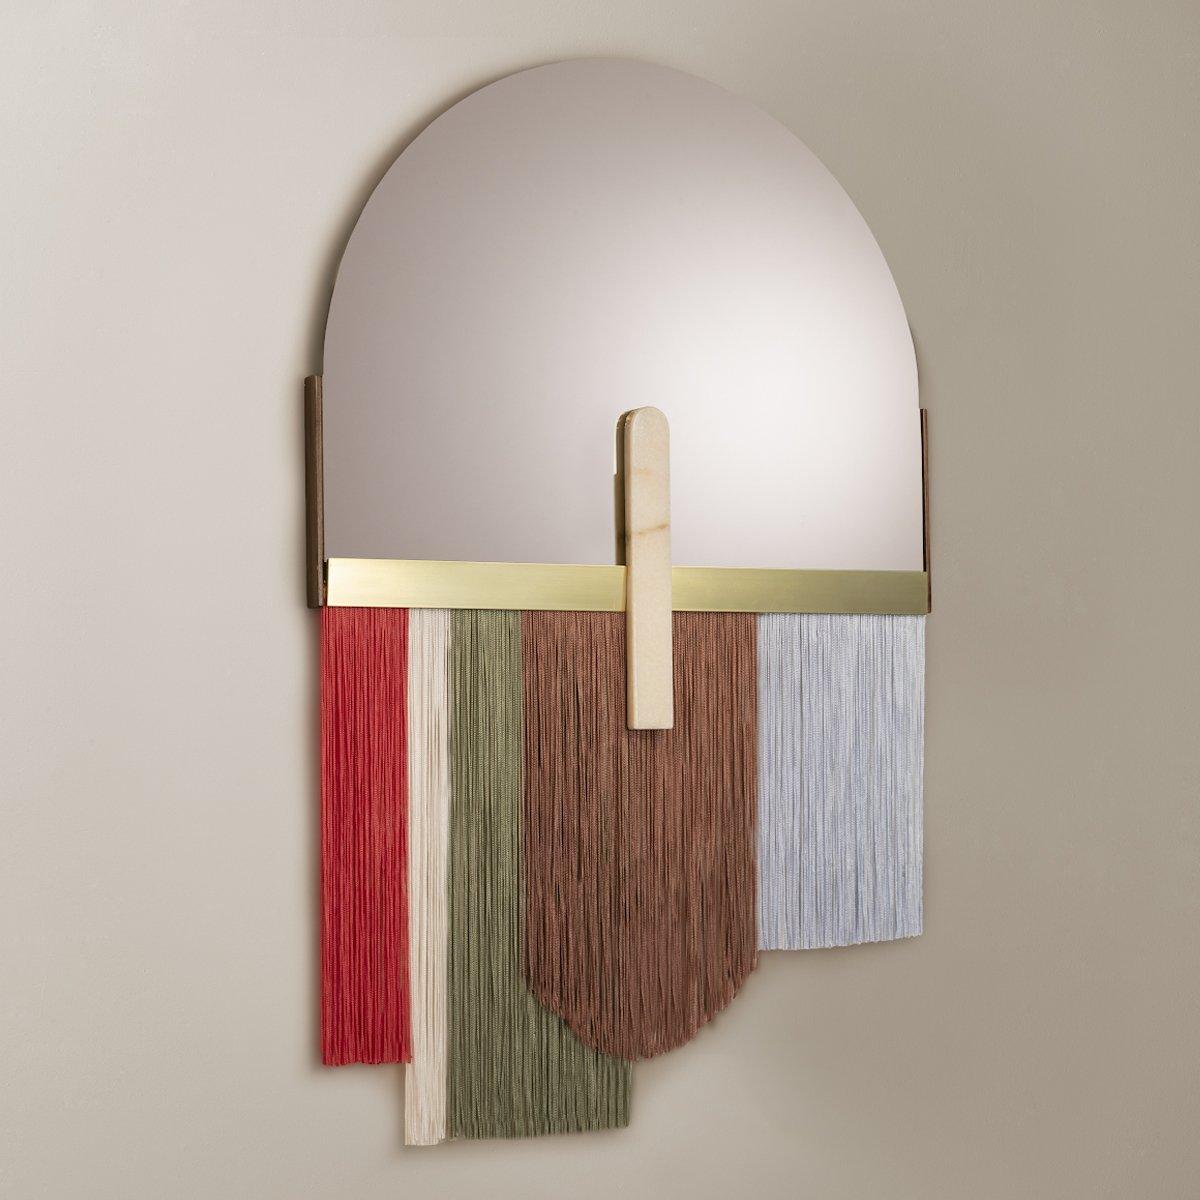 Ensemble of Three Colorful Wall Mirrors by Dooq 6